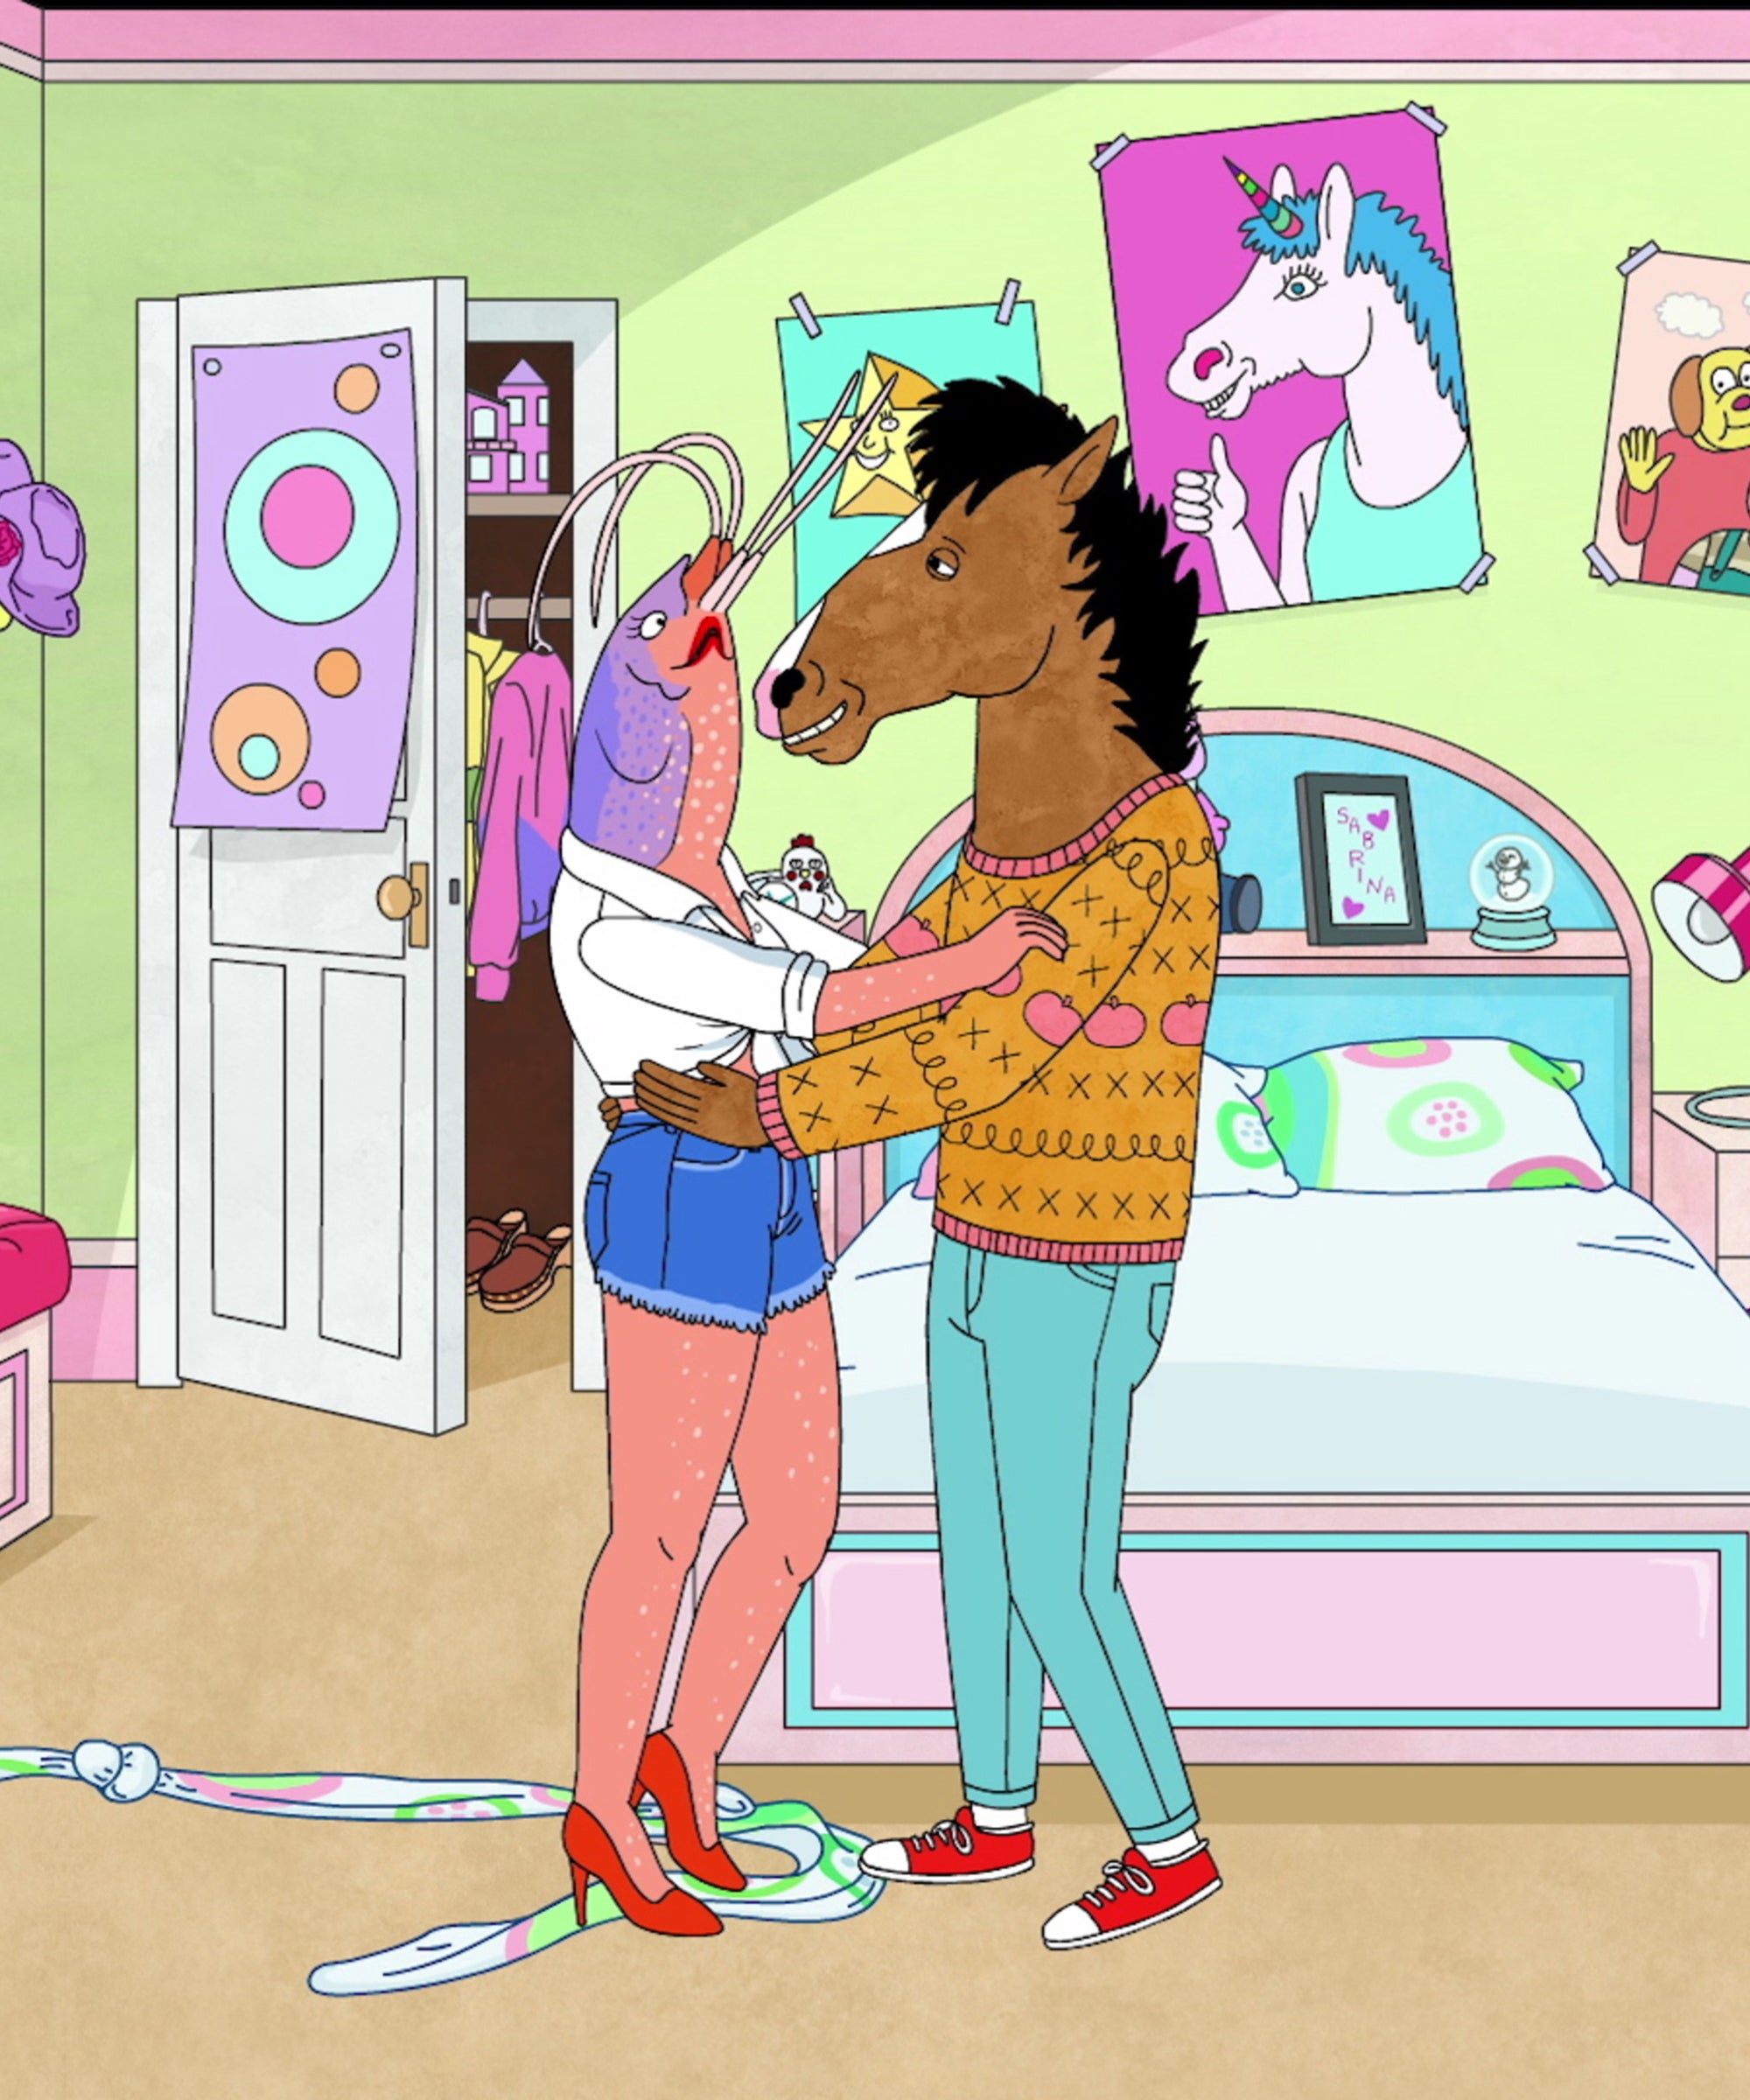 Who Voices Characters And Cameos In BoJack Season 6?